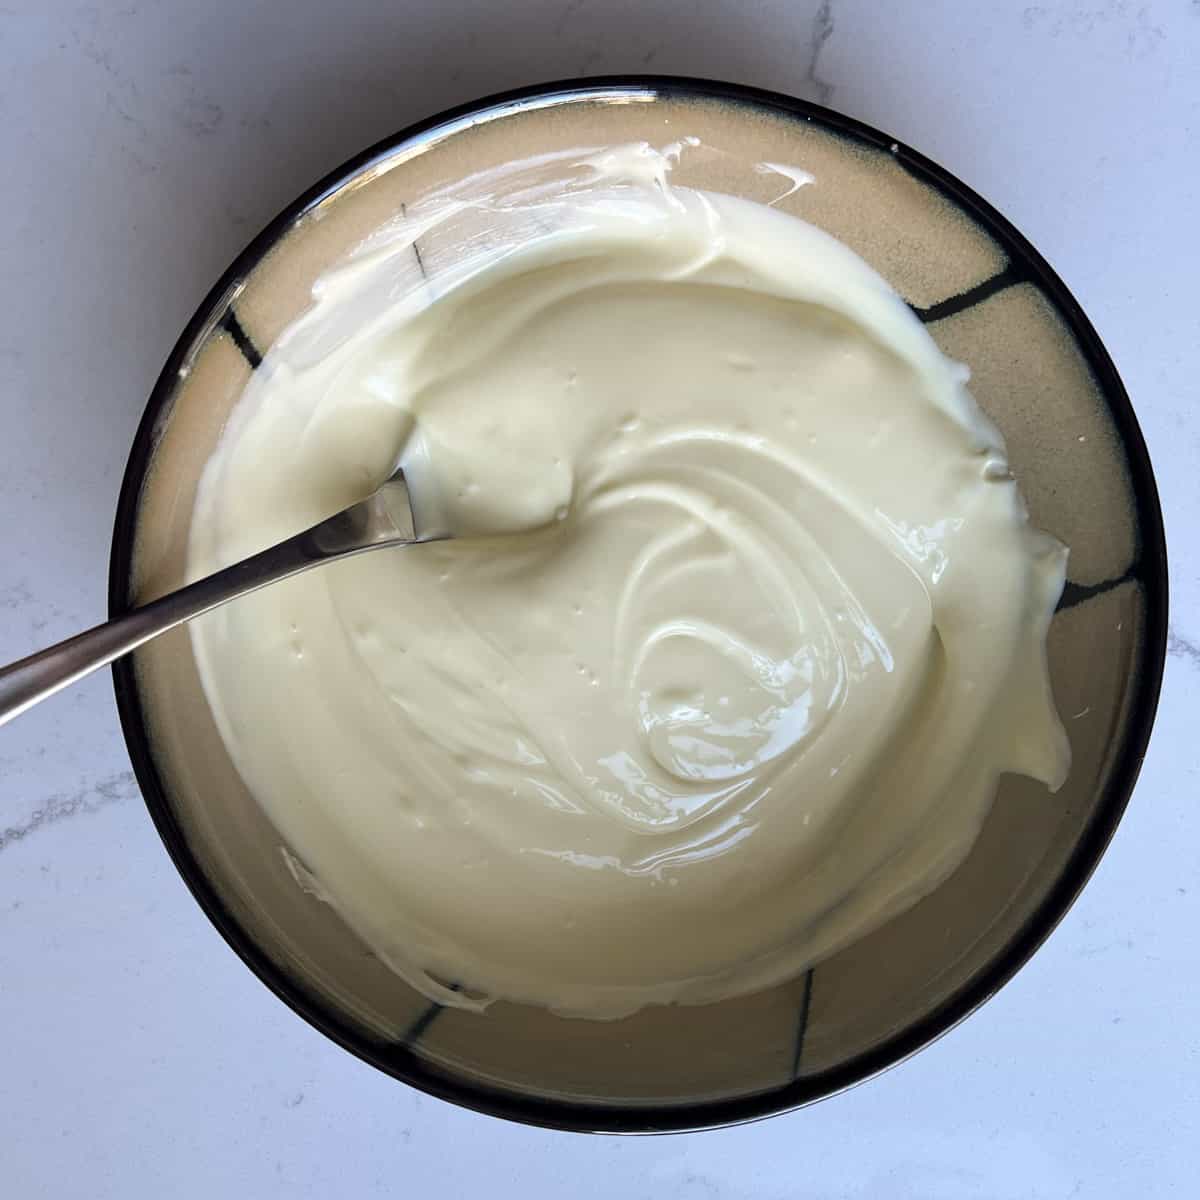 Milkybar cheesecake process - stirring a bowl of melted chocolate.